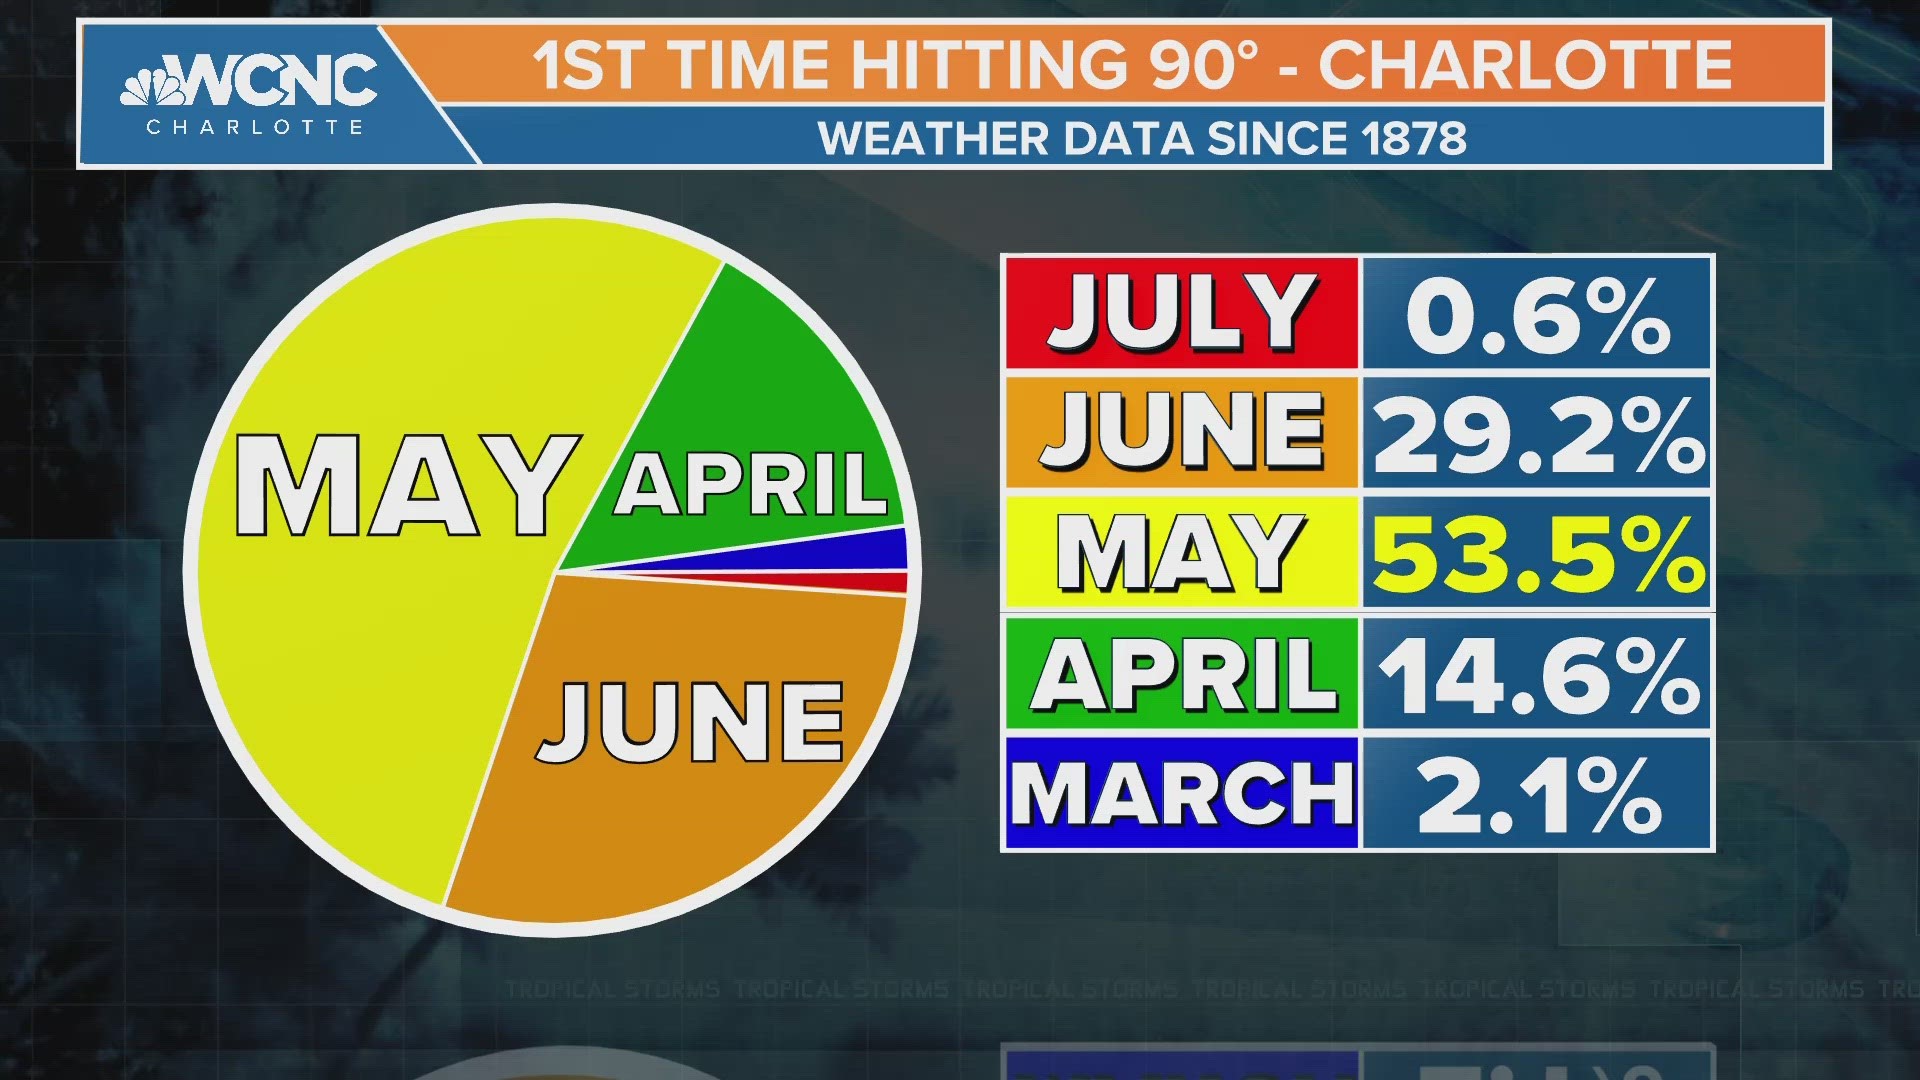 Meteorological summer has officially began. Here is how spring wrapped up and some facts on how 90 degrees is coming late this year.